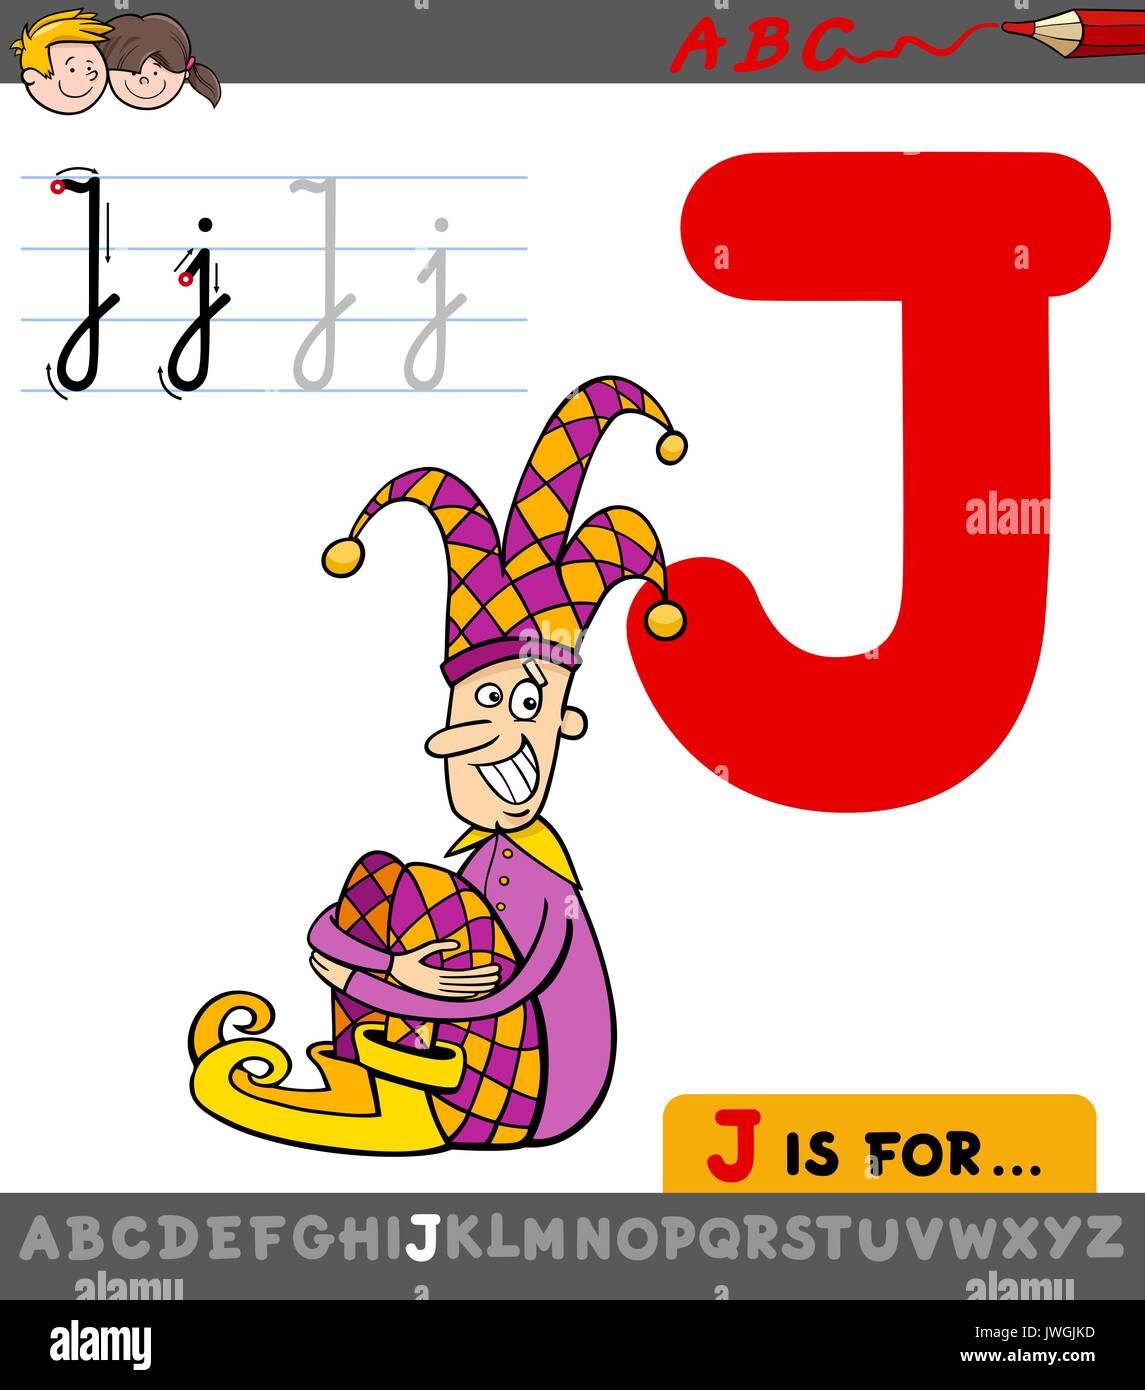 Educational Cartoon Illustration of Letter J from Alphabet with Jester Character for Children Stock Vector